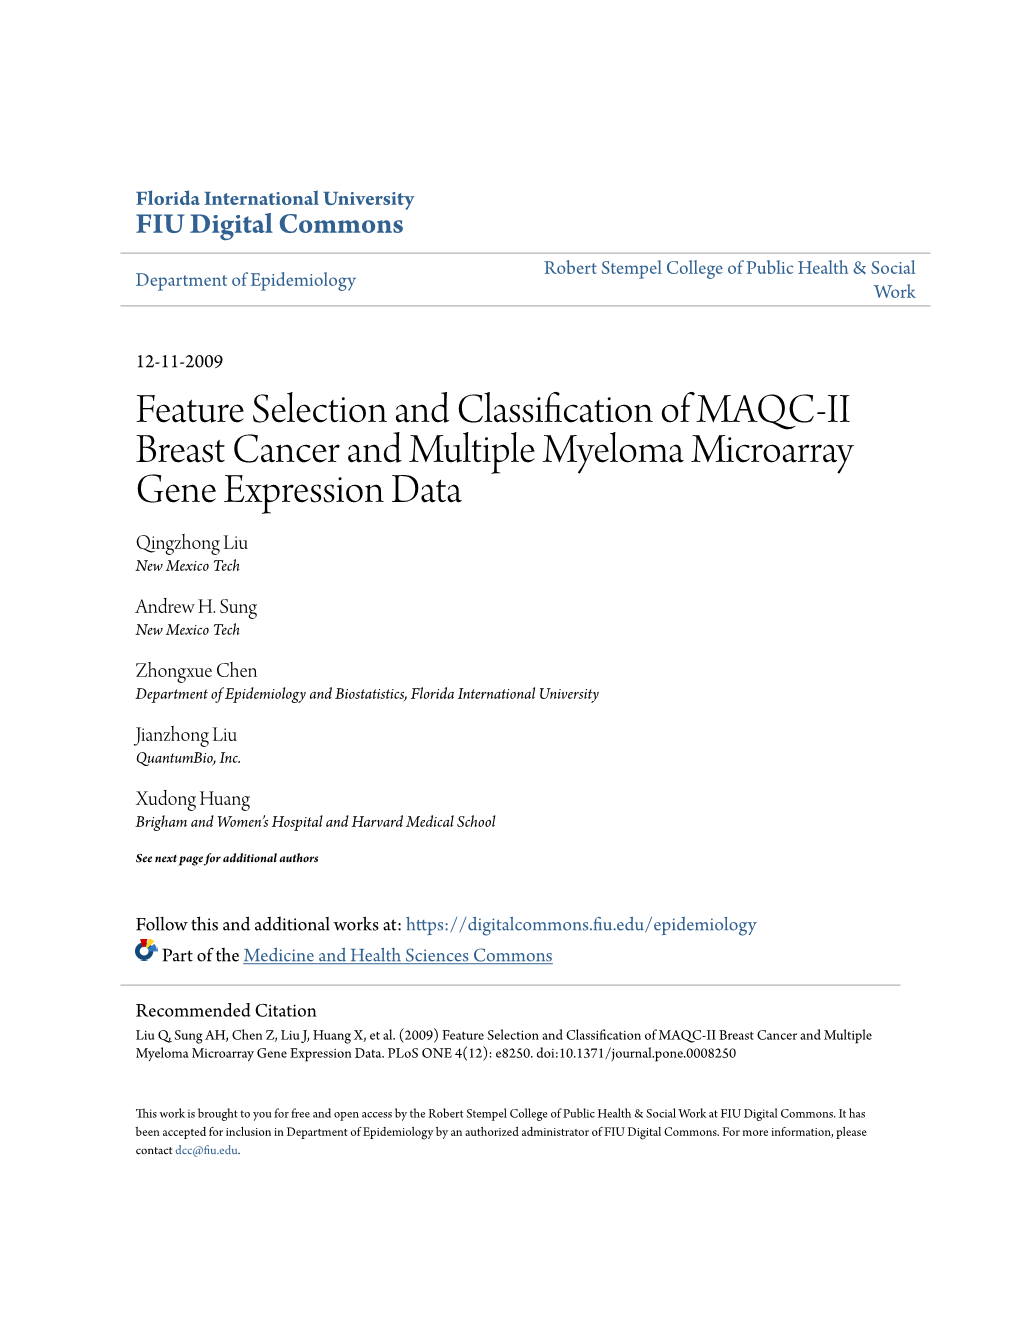 Feature Selection and Classification of MAQC-II Breast Cancer and Multiple Myeloma Microarray Gene Expression Data Qingzhong Liu New Mexico Tech